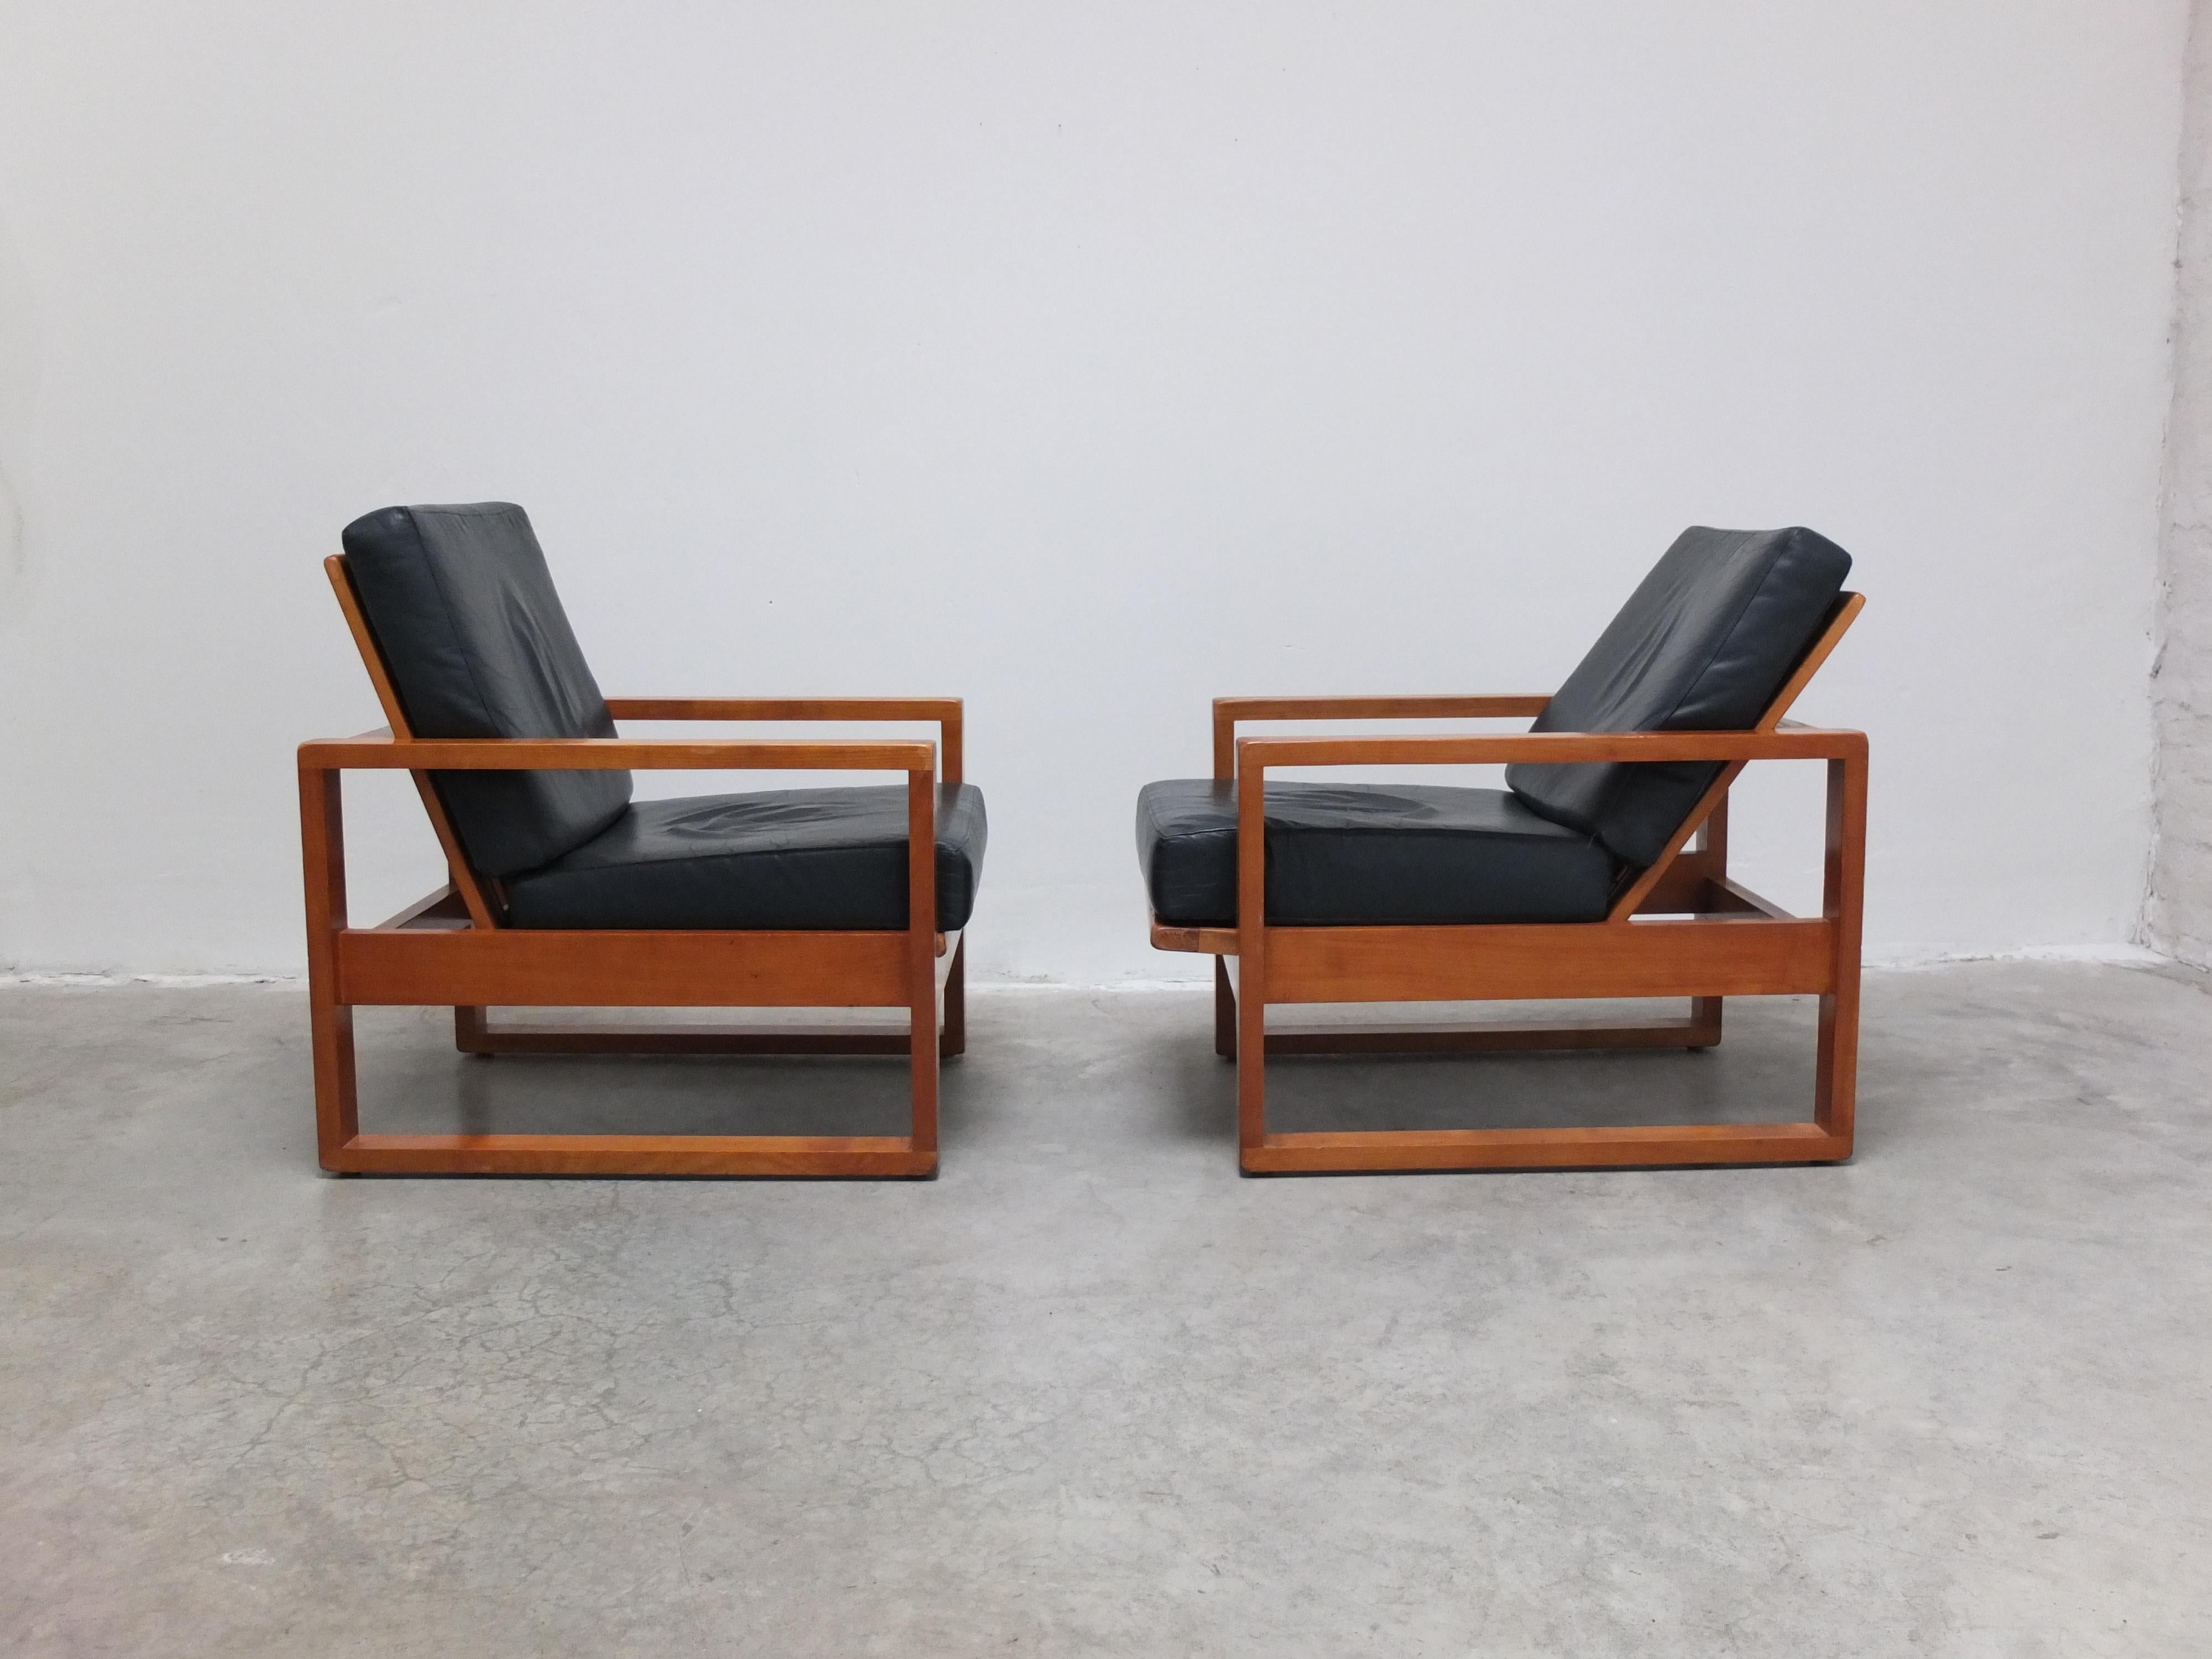 Unique Pair of Modernist Lounge Chairs by Van Den Berghe-Pauvers, 1960s For Sale 7